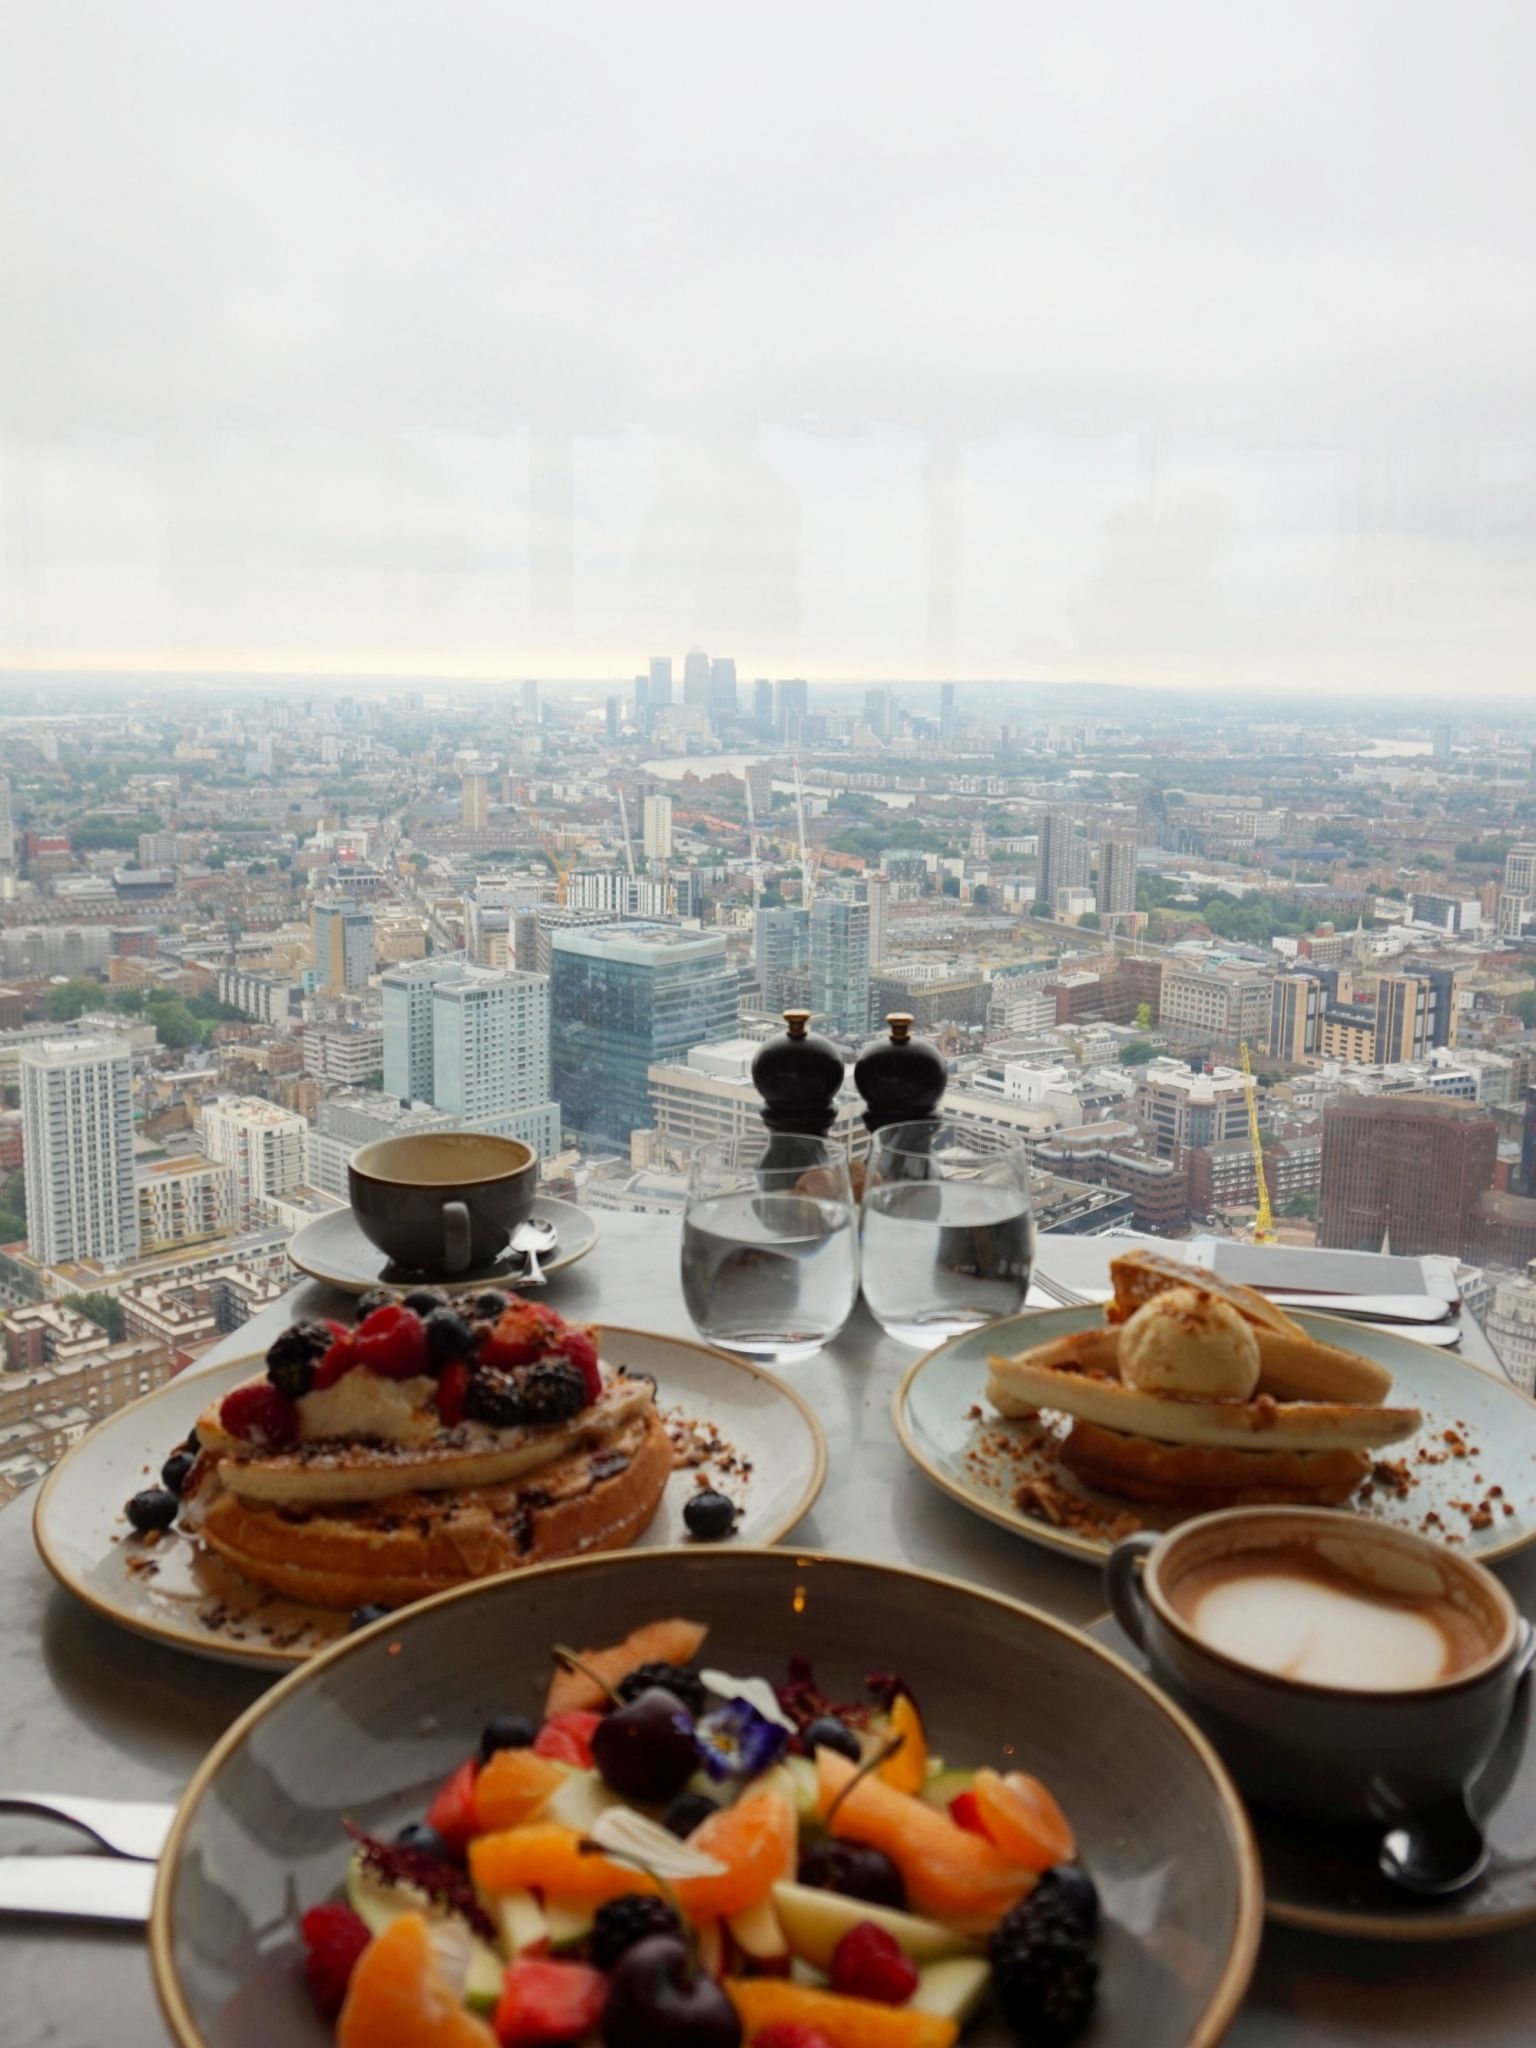 Early morning brunch at the Duck and Waffle - Les petites joies de la